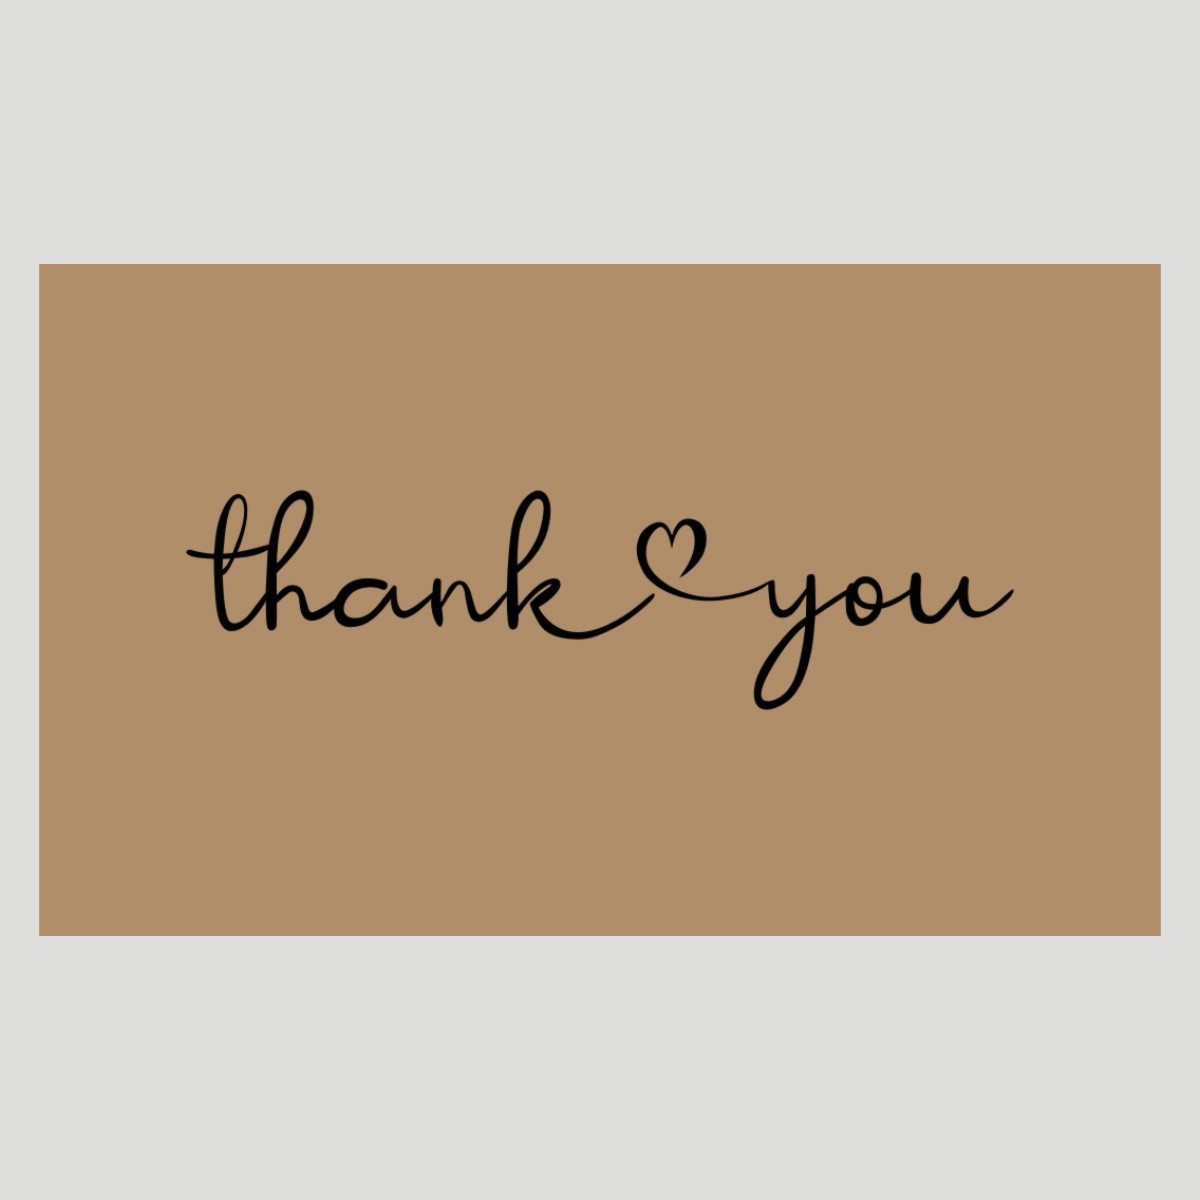 

50pcs Mini Thank You Cards, Small Business Thank You Support Cards, Kraft Paper Thank You Cards For Your Order, 2 X 3.54 Inches (approximately 5x9 Centimeters) Retail Store Bulk Thank You Cards